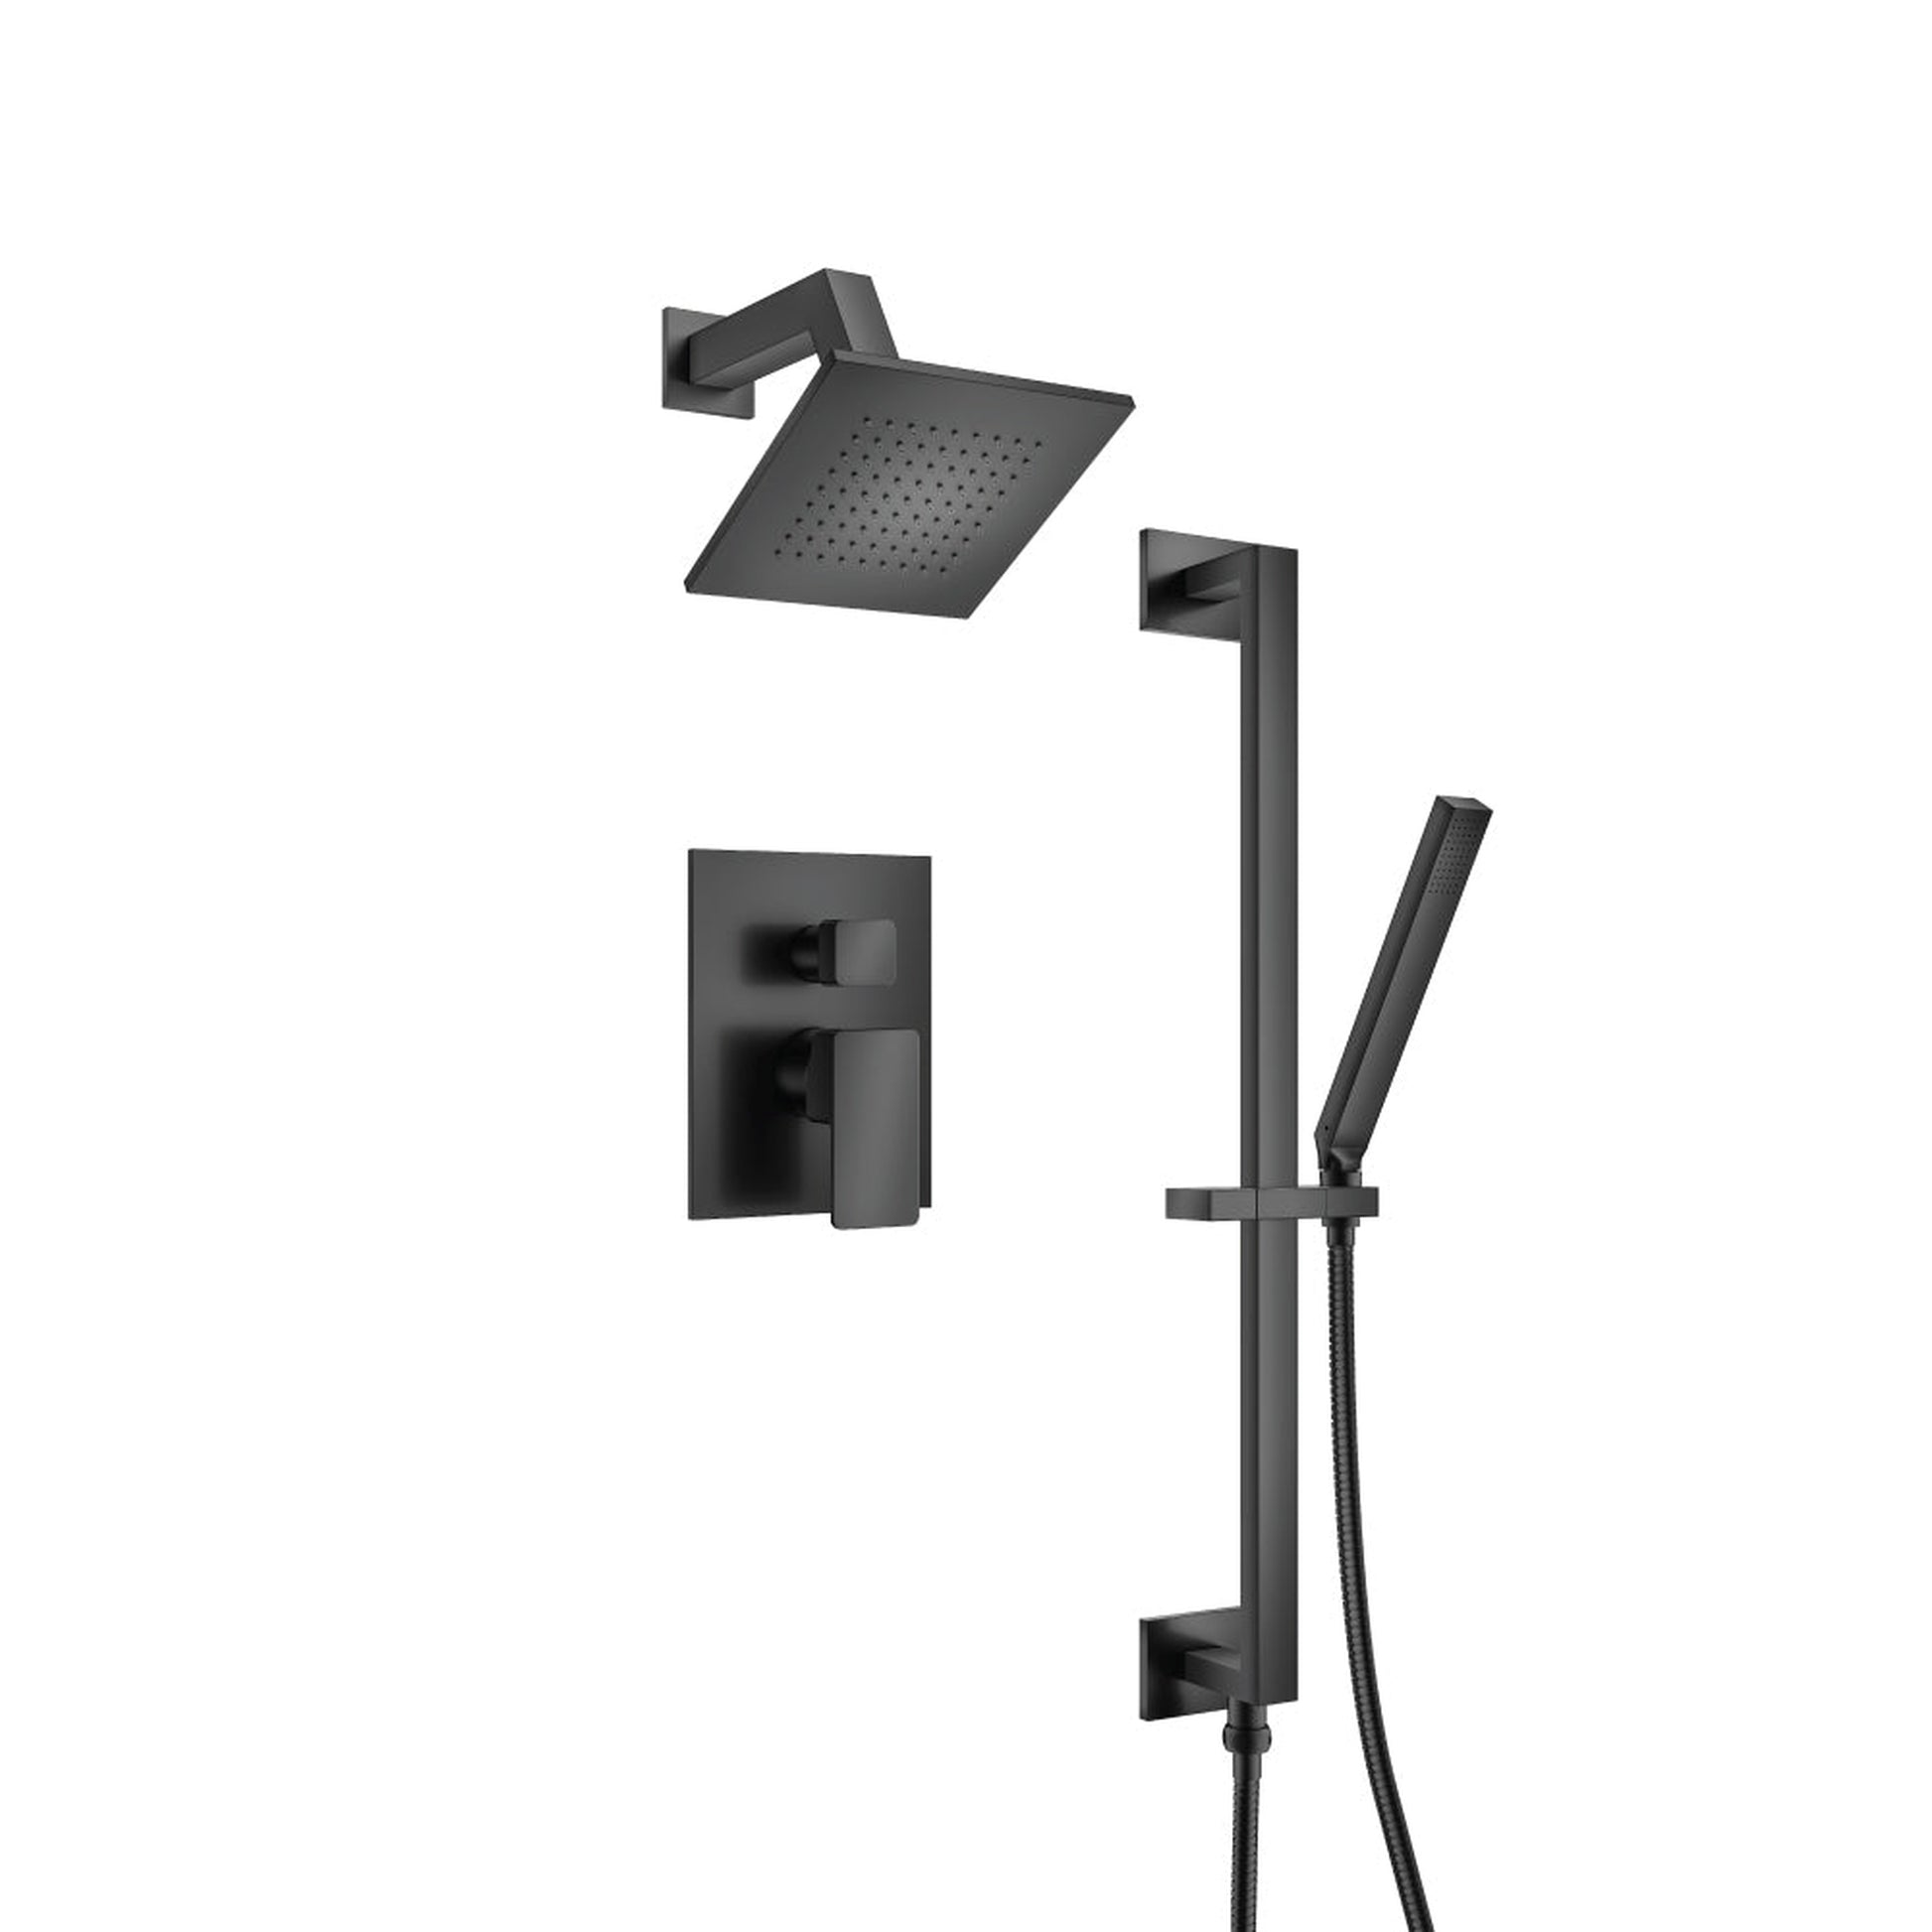 Isenberg Serie 196 Two Output Shower Set With Shower Head, Hand Held and Slide Bar in Matte Black (196.3400MB)